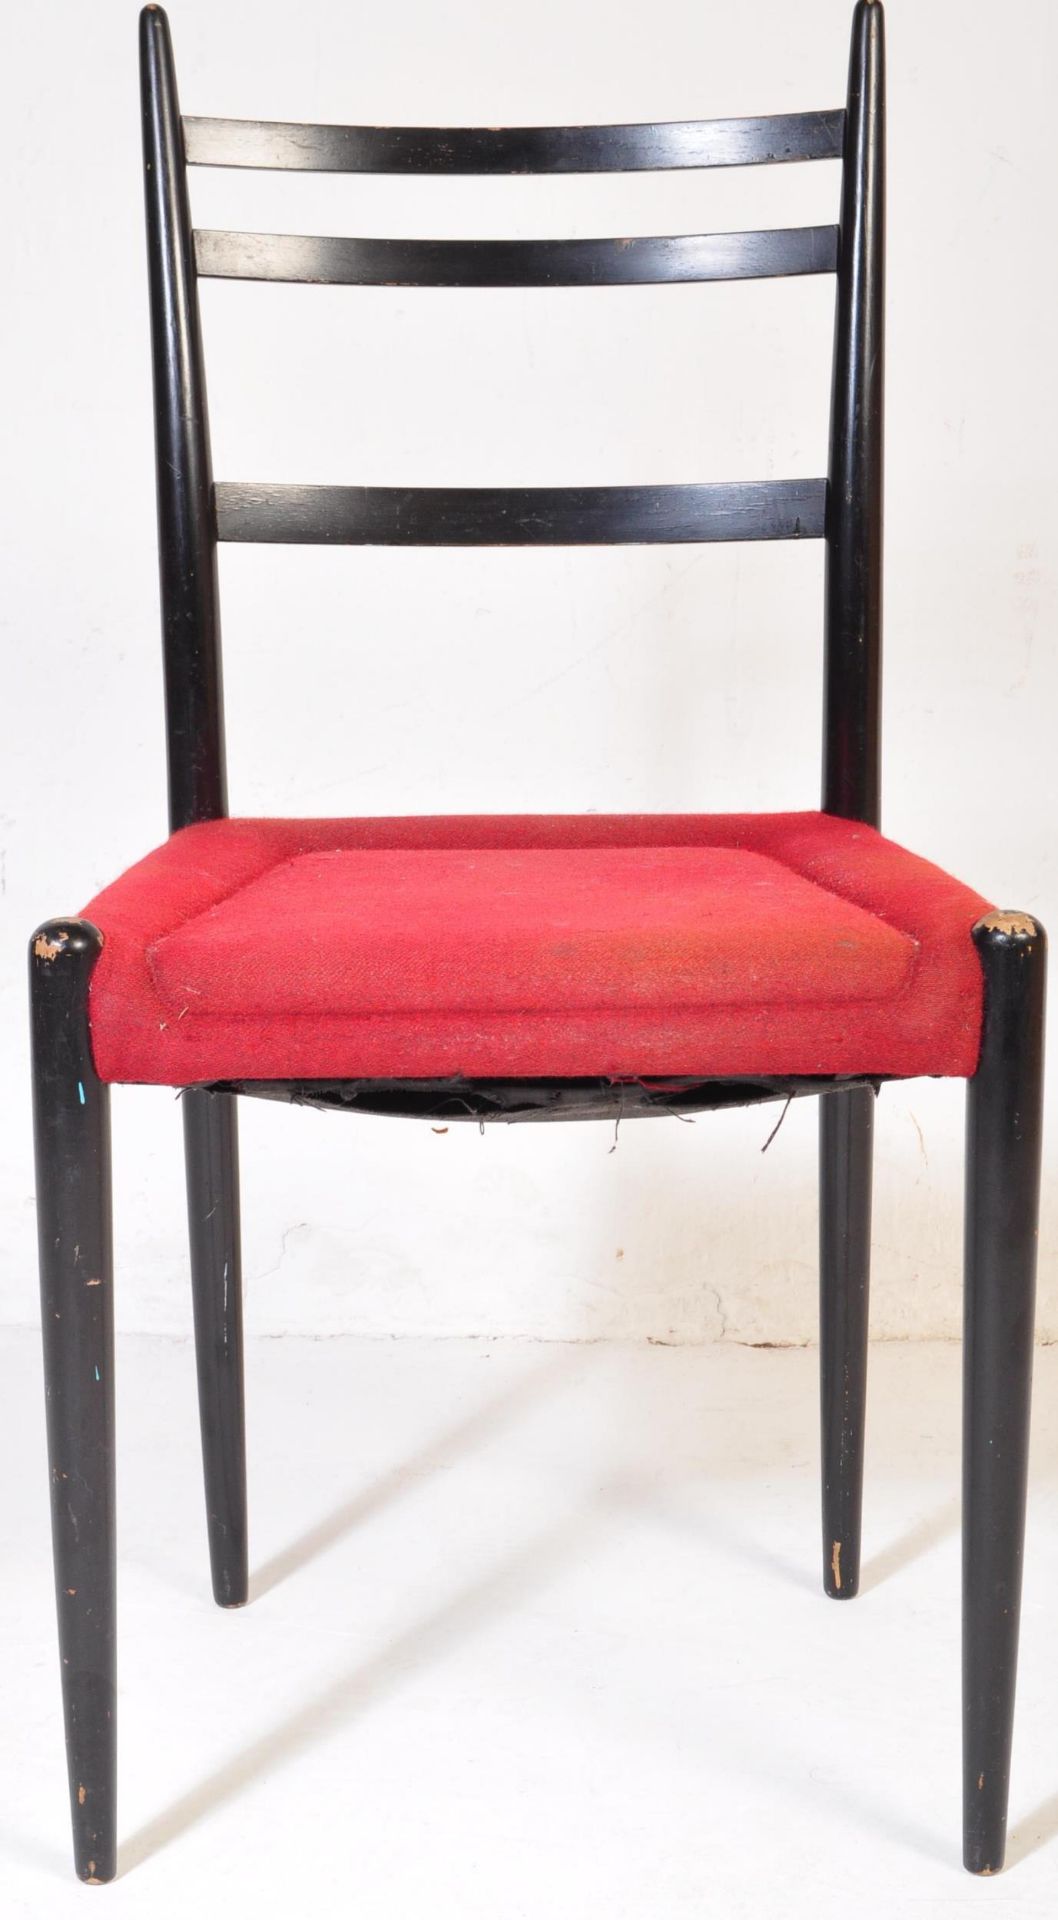 FOUR RETRO MID 20TH CENTURY EBONISED DINING CHAIRS - Image 3 of 5